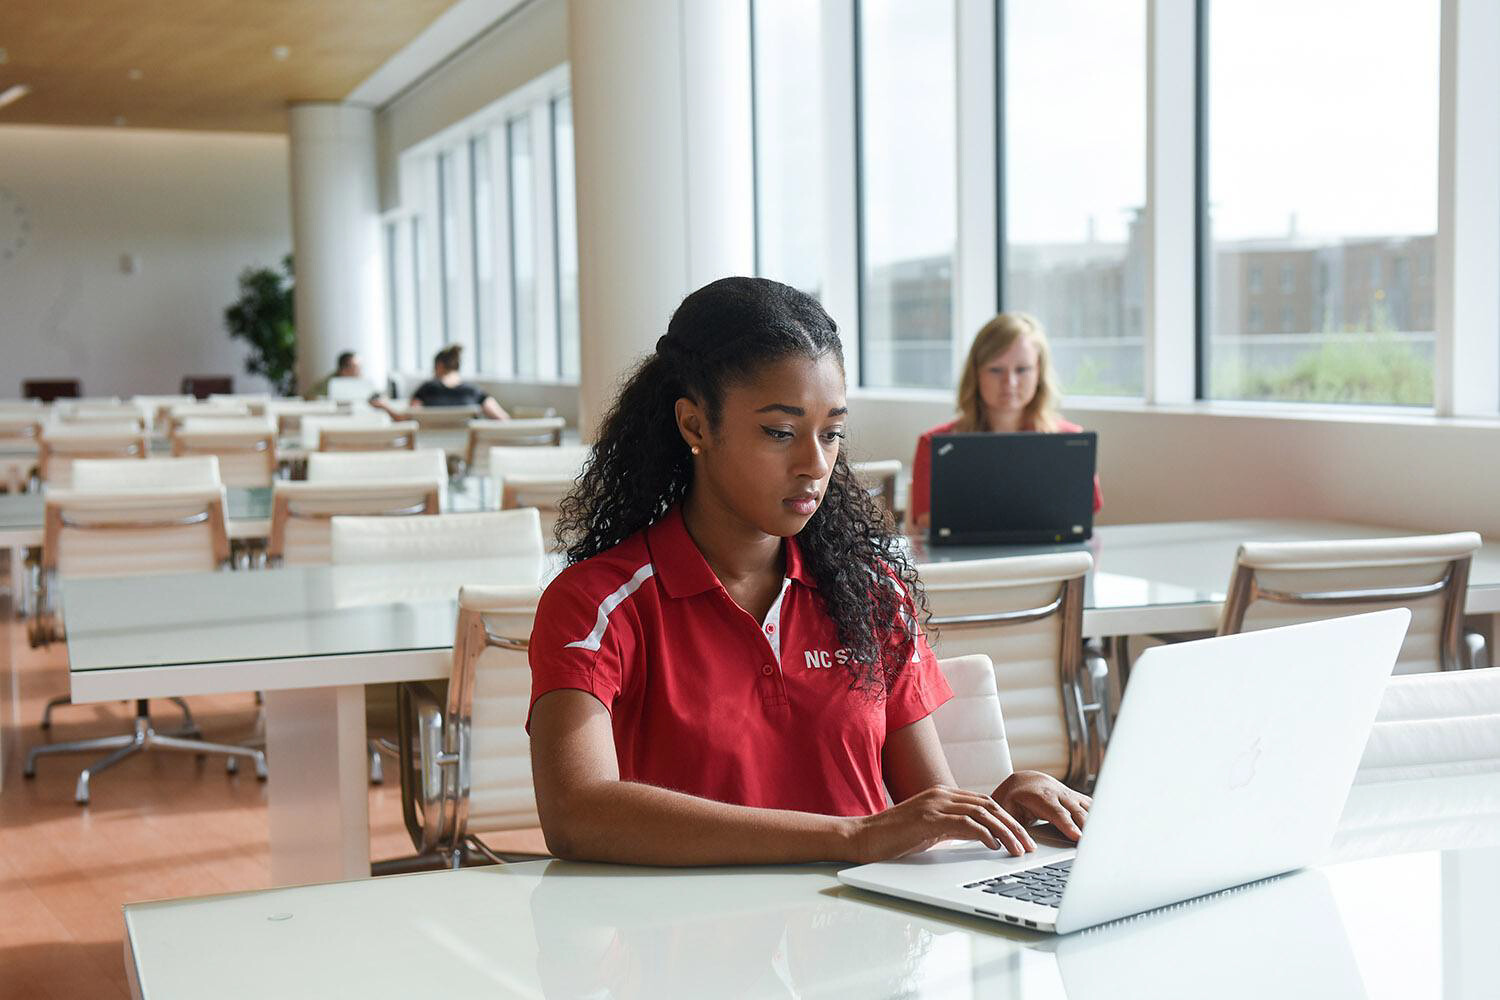 A college student in a red and white and NC State polo shirt sits in front of a laptop at a table in a white room with a wall of windows